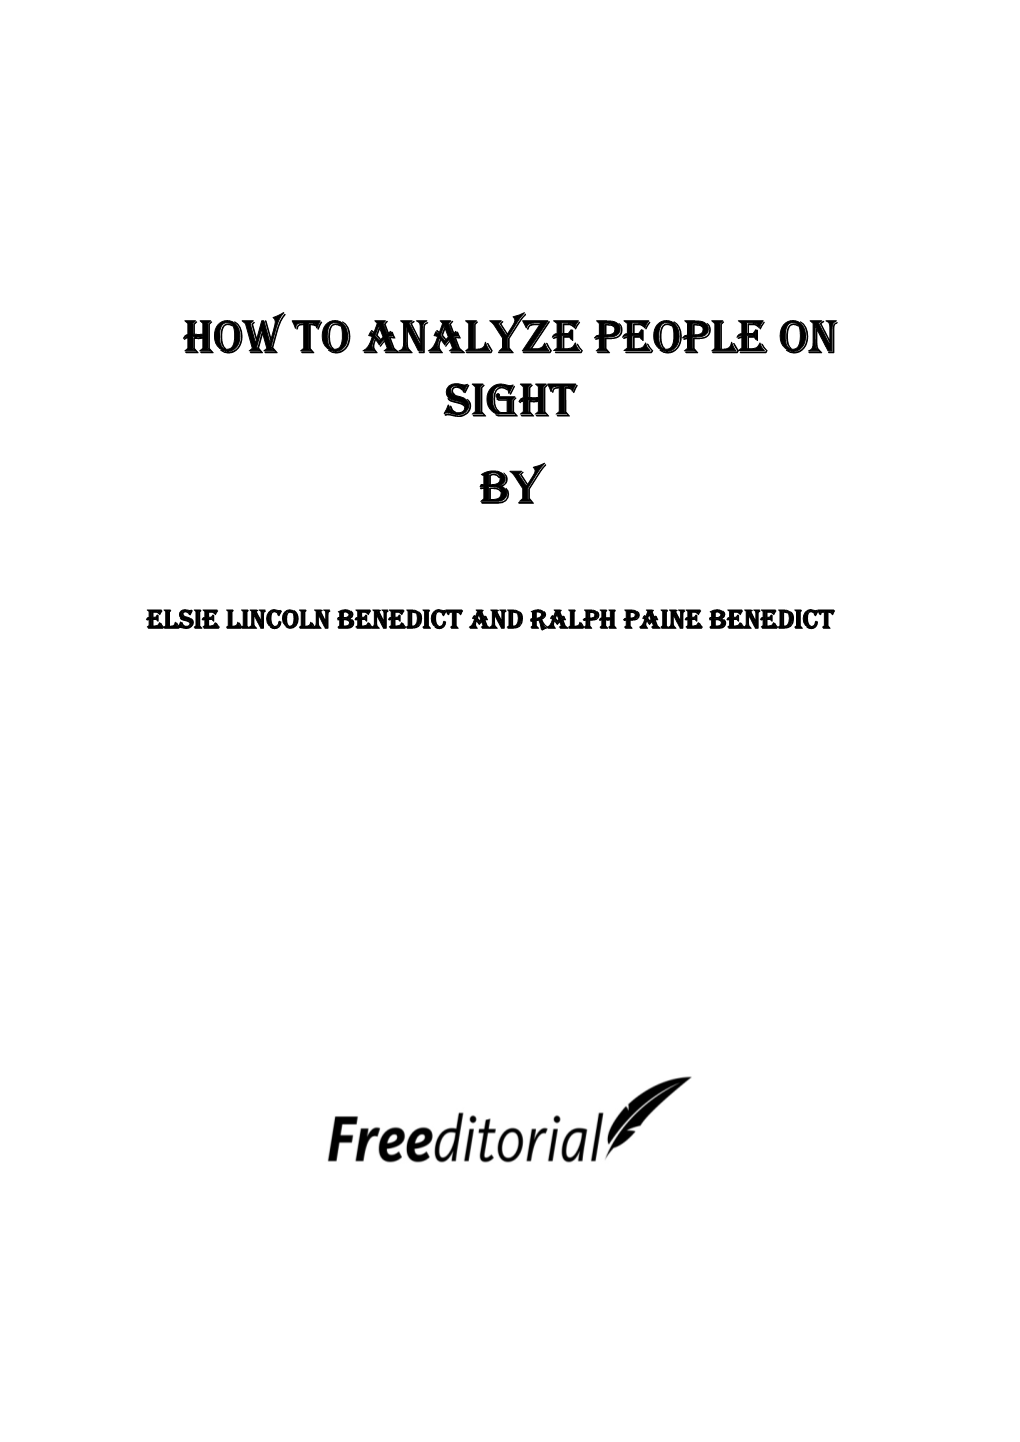 How to Analyze People on Sight By